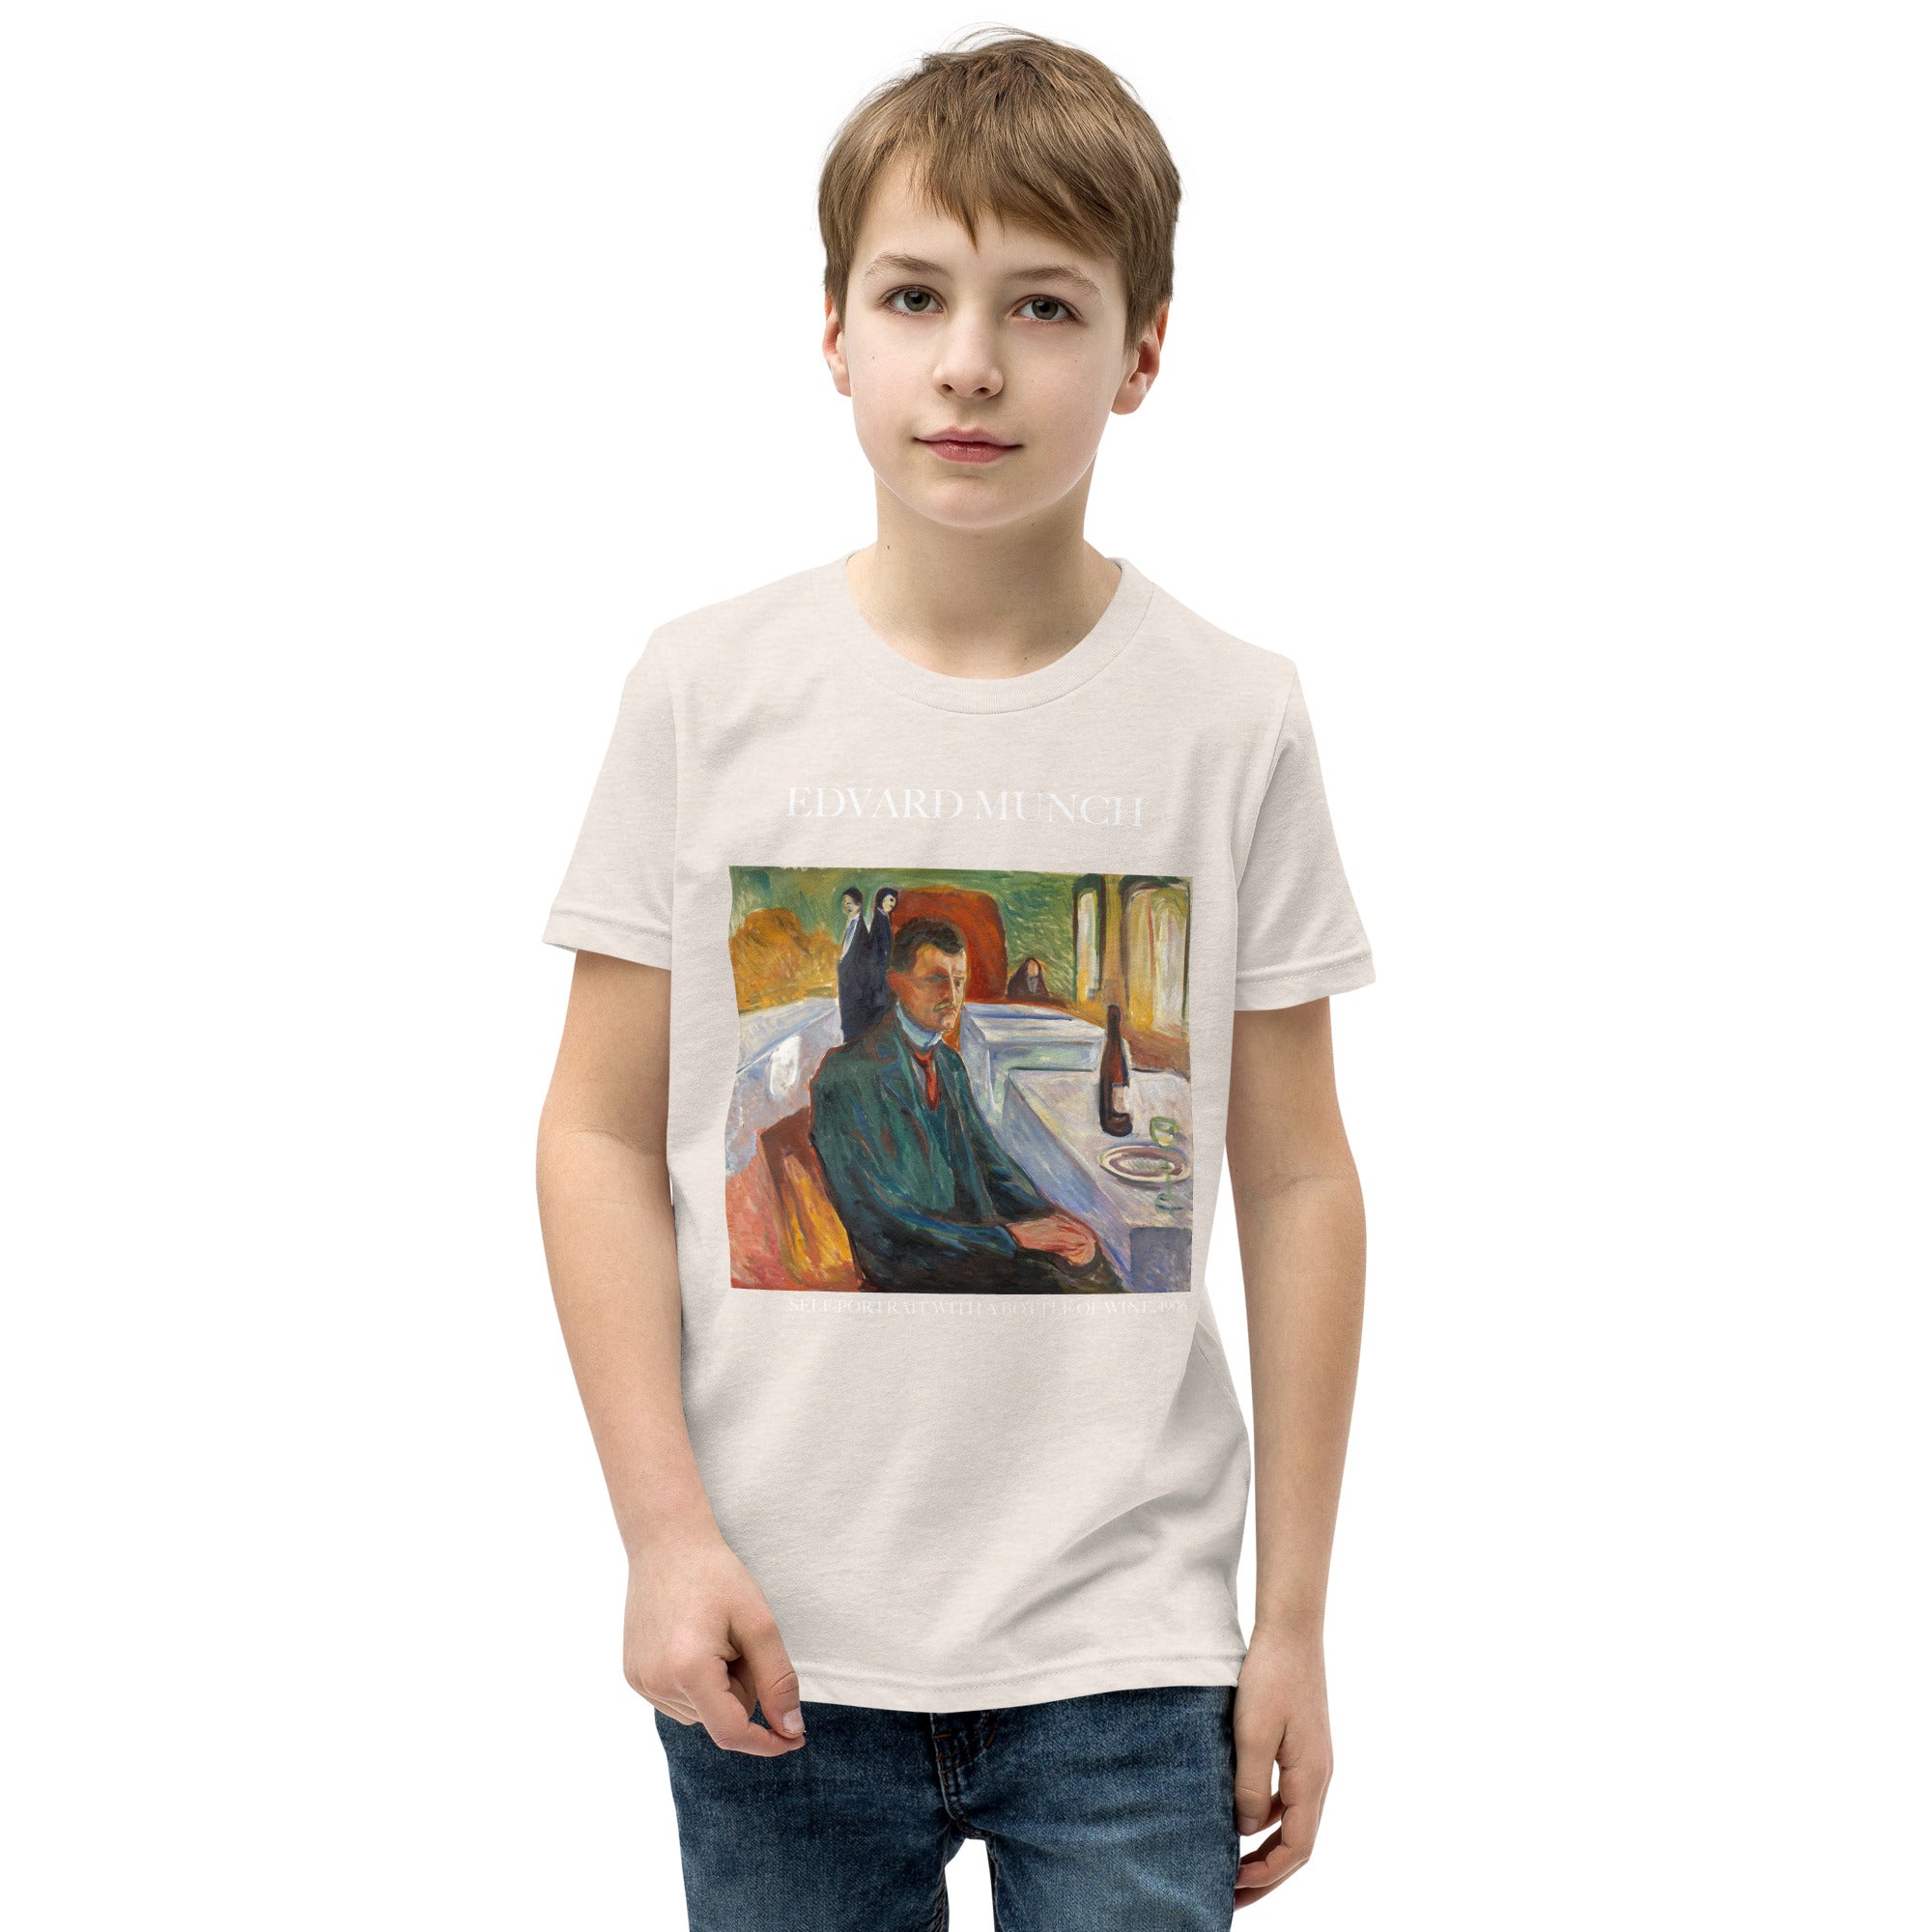 Edvard Munch 'Self-Portrait with a Bottle of Wine' Famous Painting Short Sleeve T-Shirt | Premium Youth Art Tee